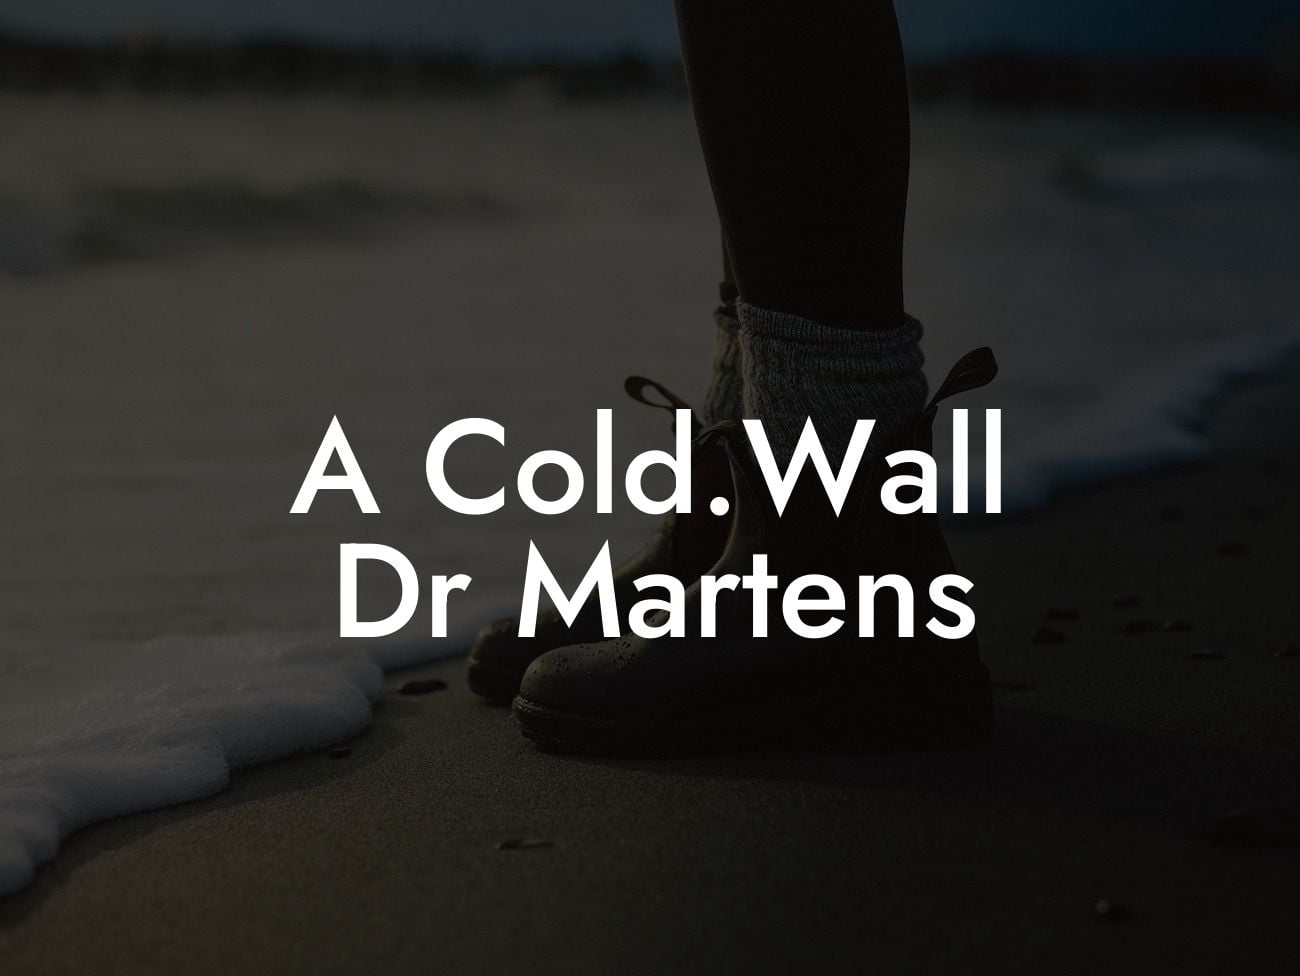 A Cold.Wall Dr Martens